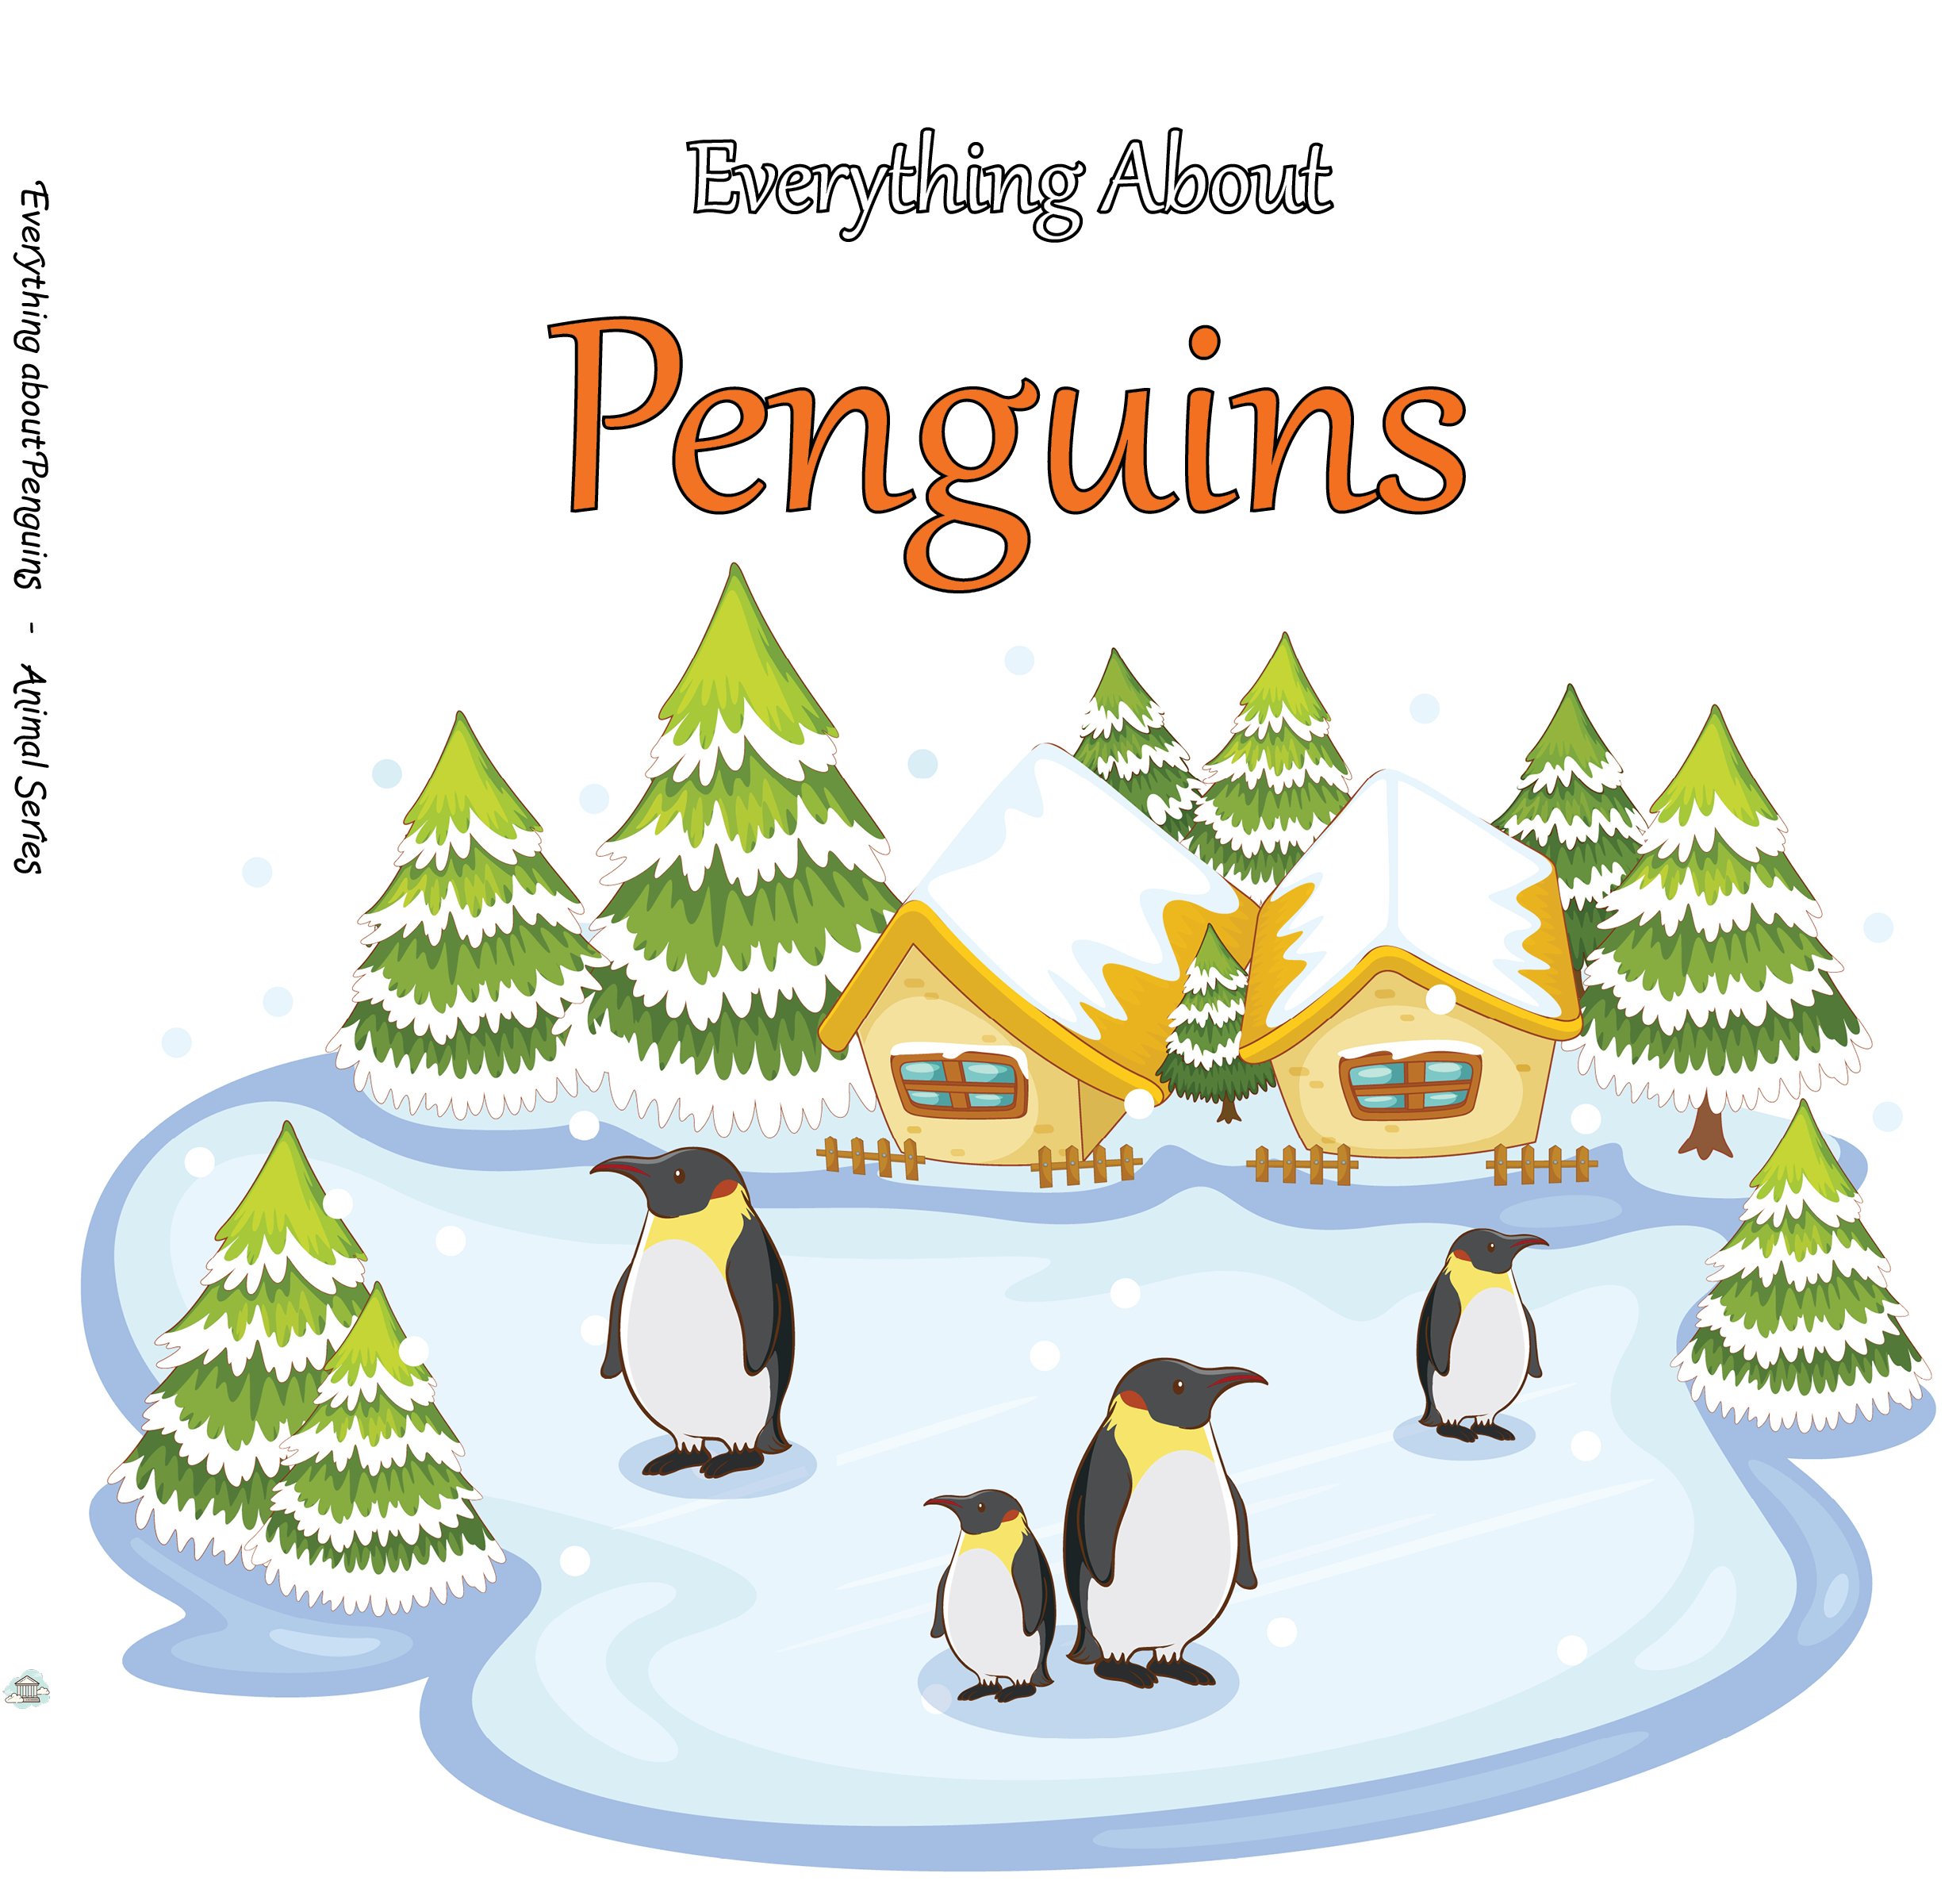 Everything about Penguins - Animal Series.jpg